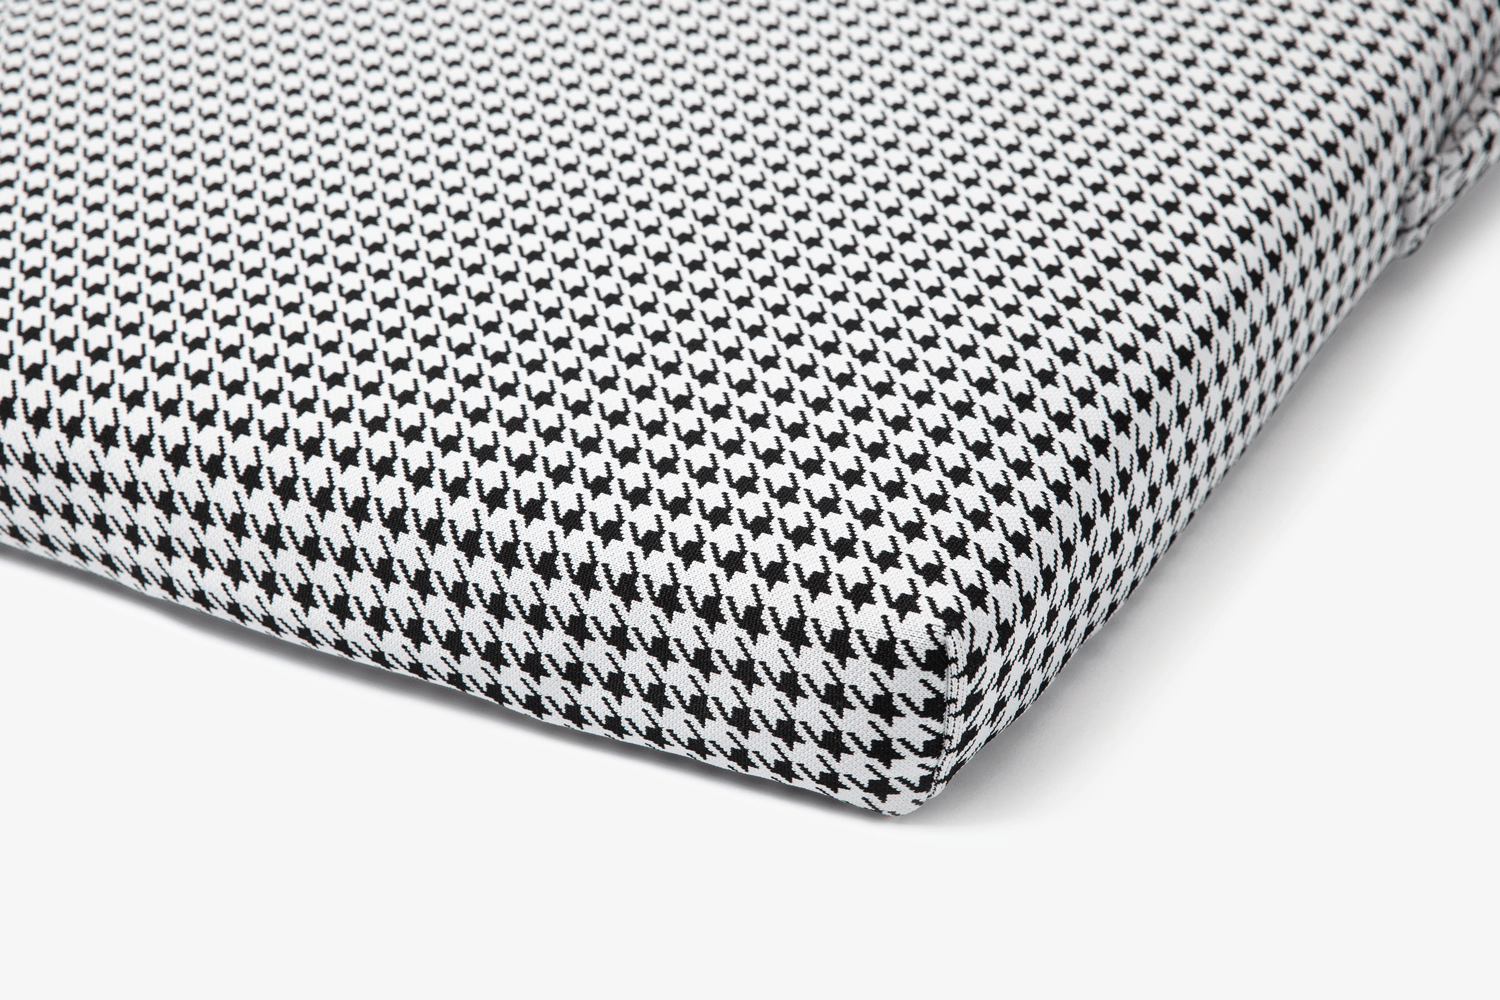 Laylo Pets LAY LO Pets - Houndstooth Dog Bed or Bed Cover Lay Lo Pets